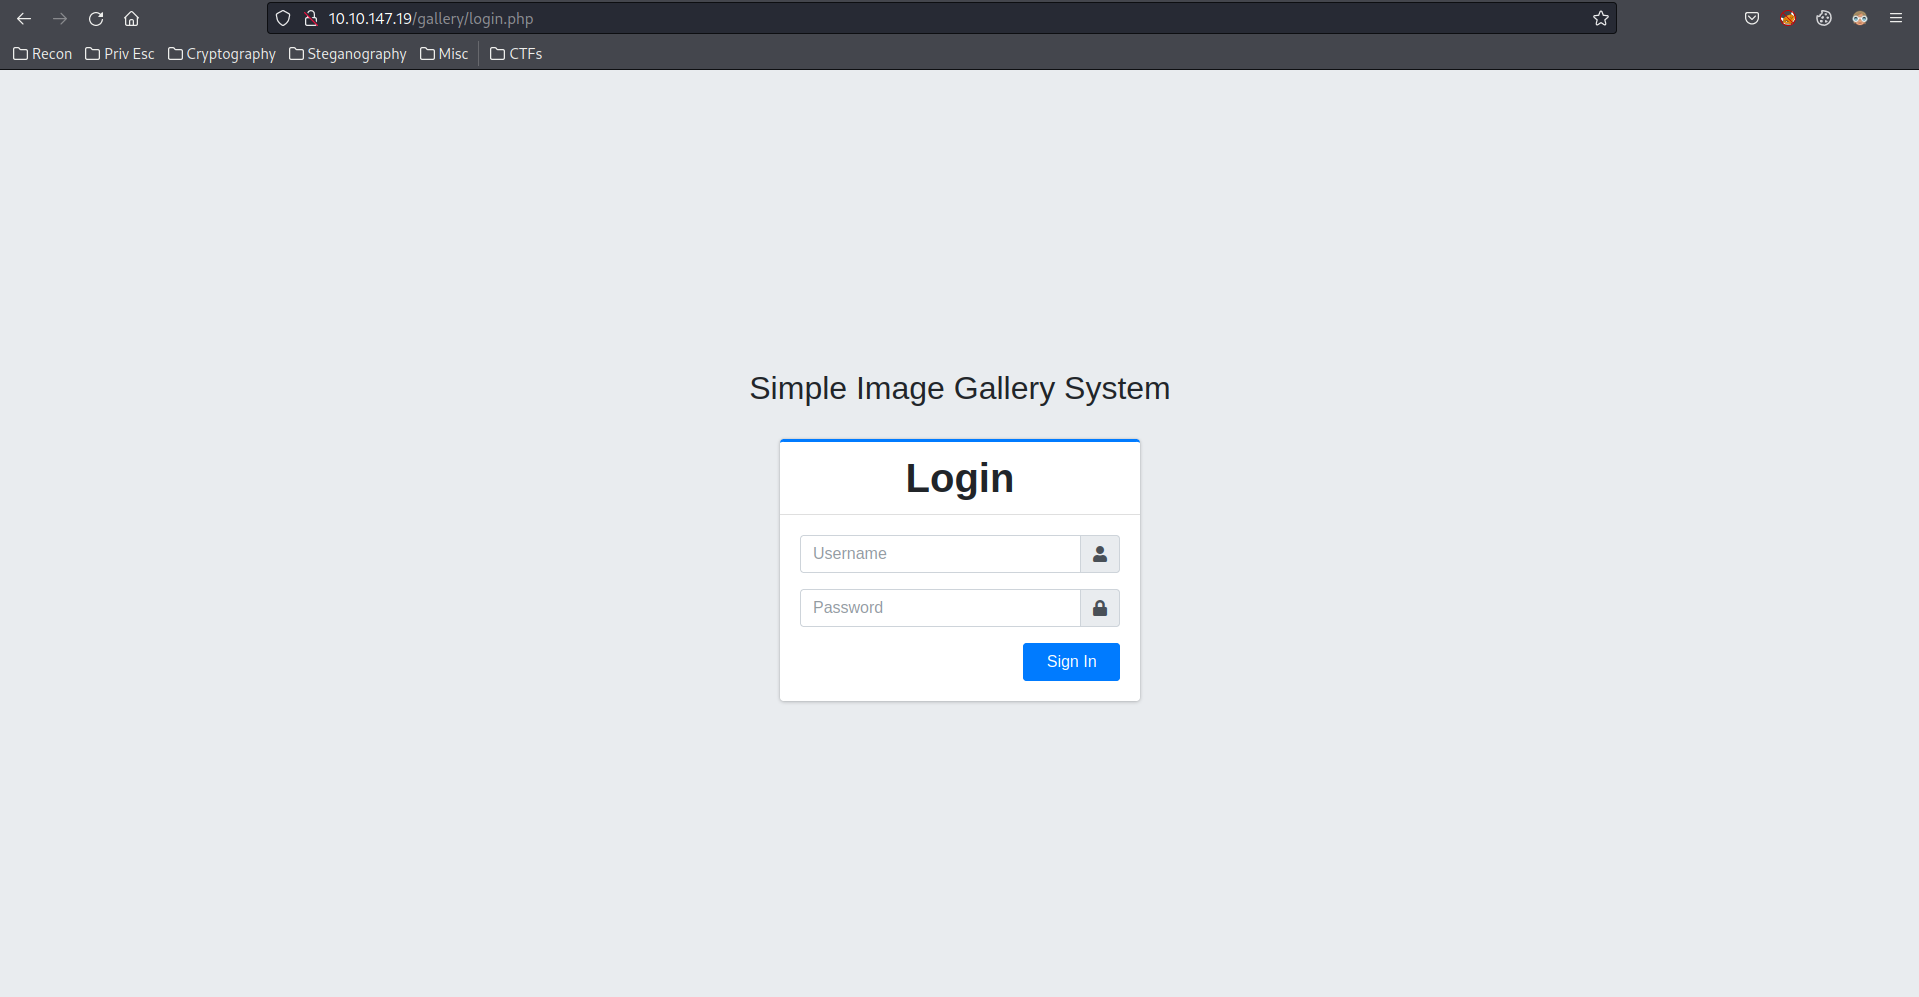 Gallery login page